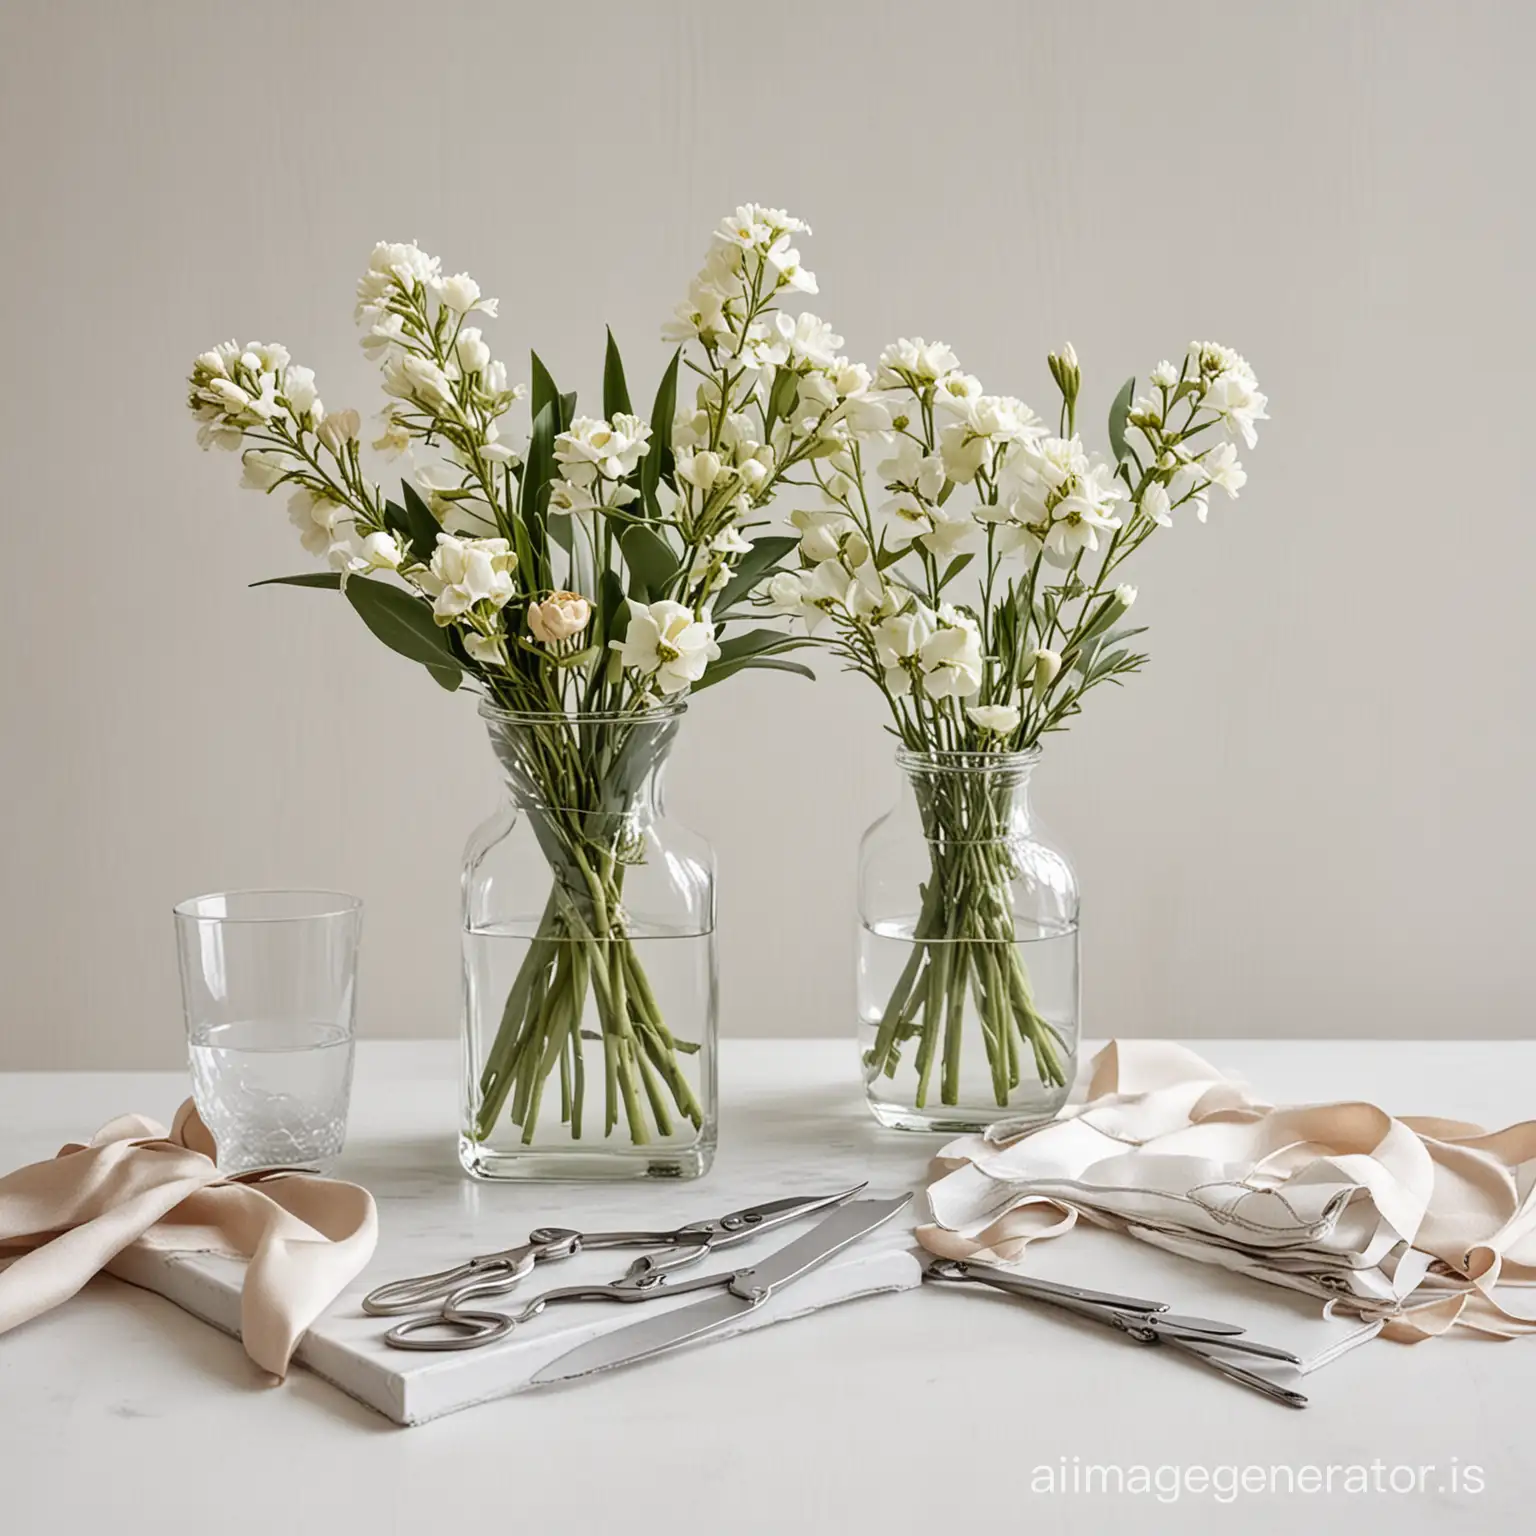 Craft-Supplies-on-Clean-White-Counter-with-HighQuality-Glass-Vases